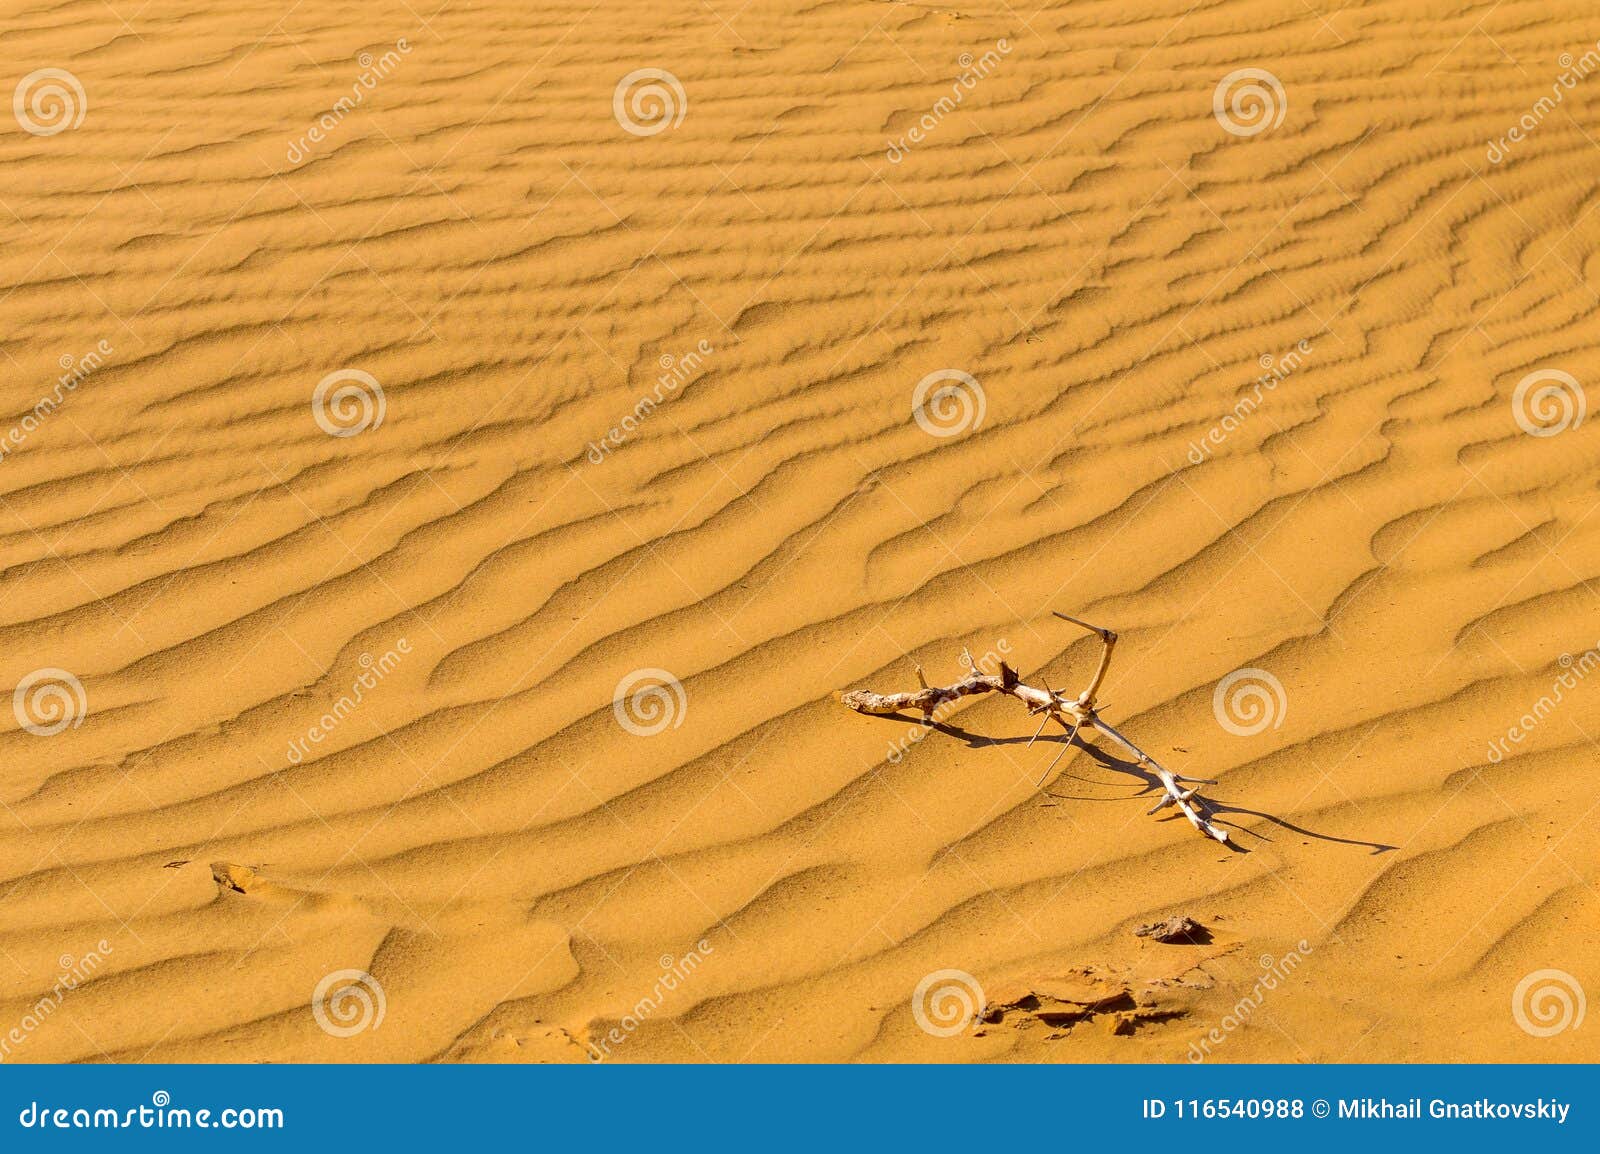 Desert Sand Background With Dry Branches Stock Photo Megapixl